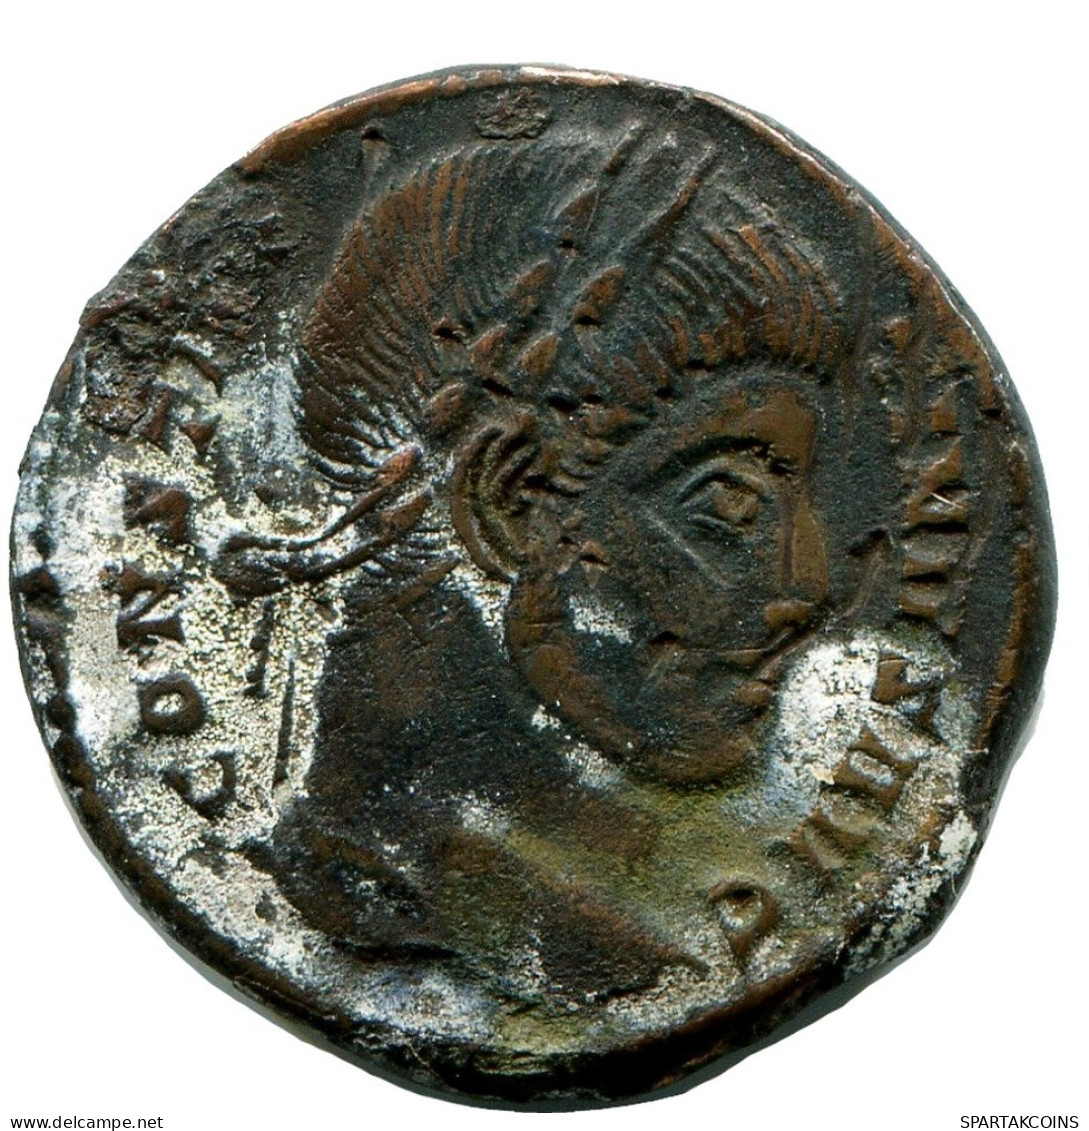 CONSTANTINE I MINTED IN TICINUM FROM THE ROYAL ONTARIO MUSEUM #ANC11079.14.F.A - L'Empire Chrétien (307 à 363)